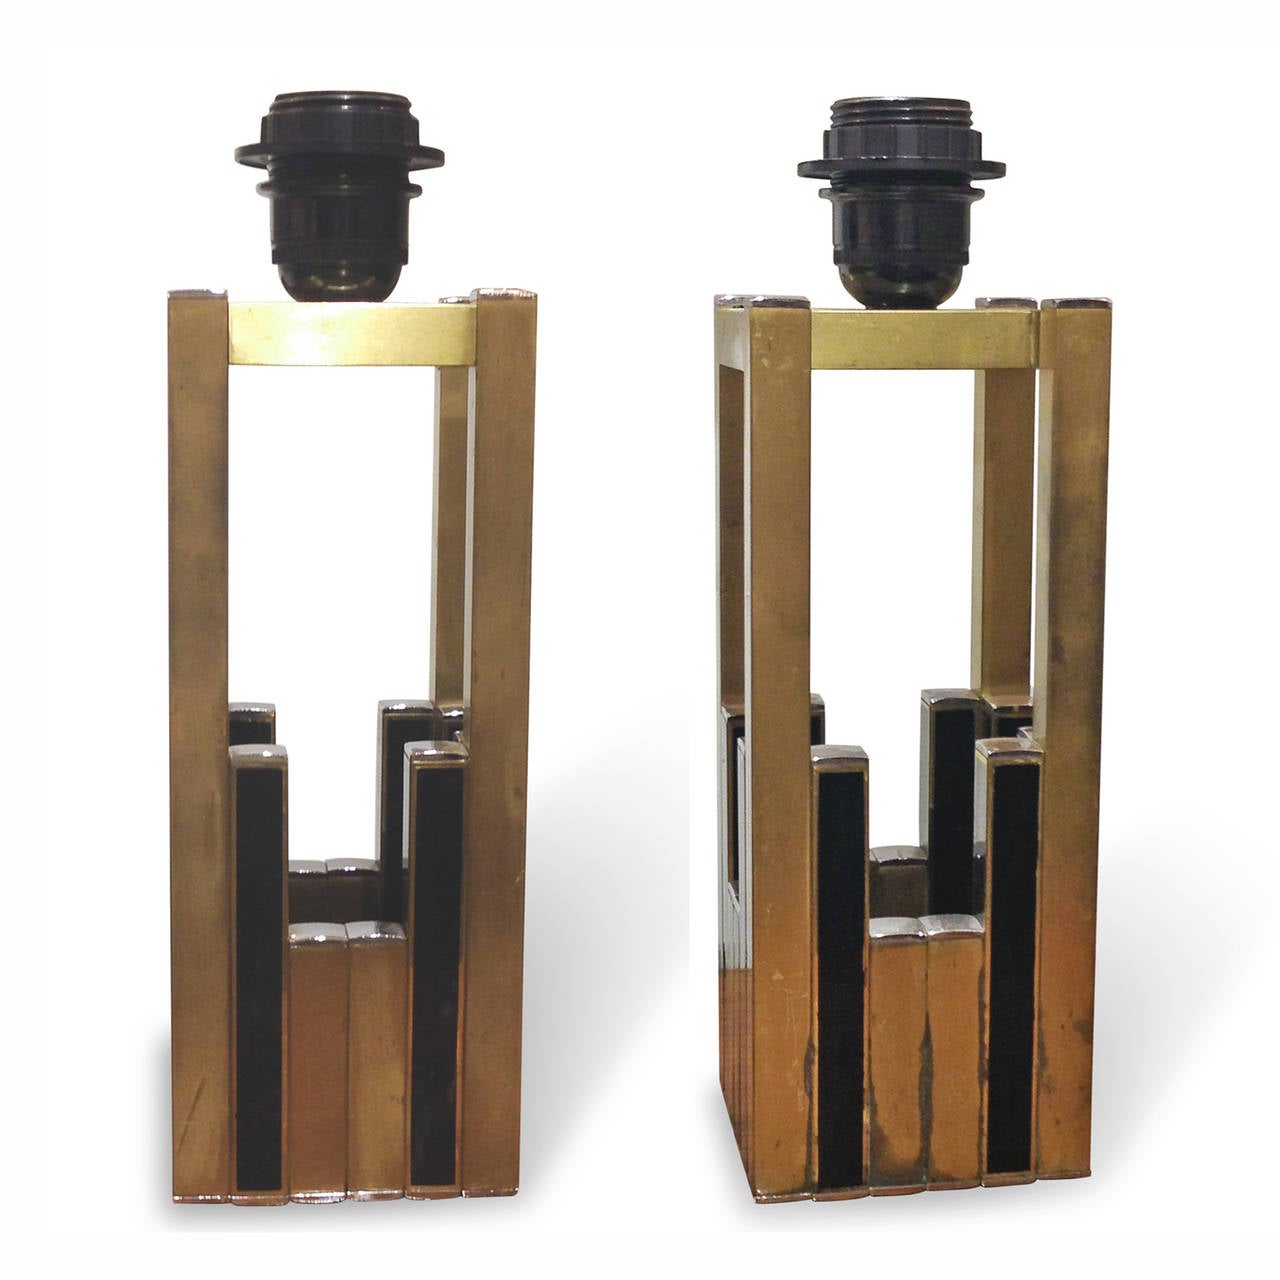 Brass and black lacquered brass table lamps, open rectangular column form with alternating black and brass elements, by Lumica, Spanish, 1970s. Height to top of socket 9 1/2 in, 3 3/4 in square.